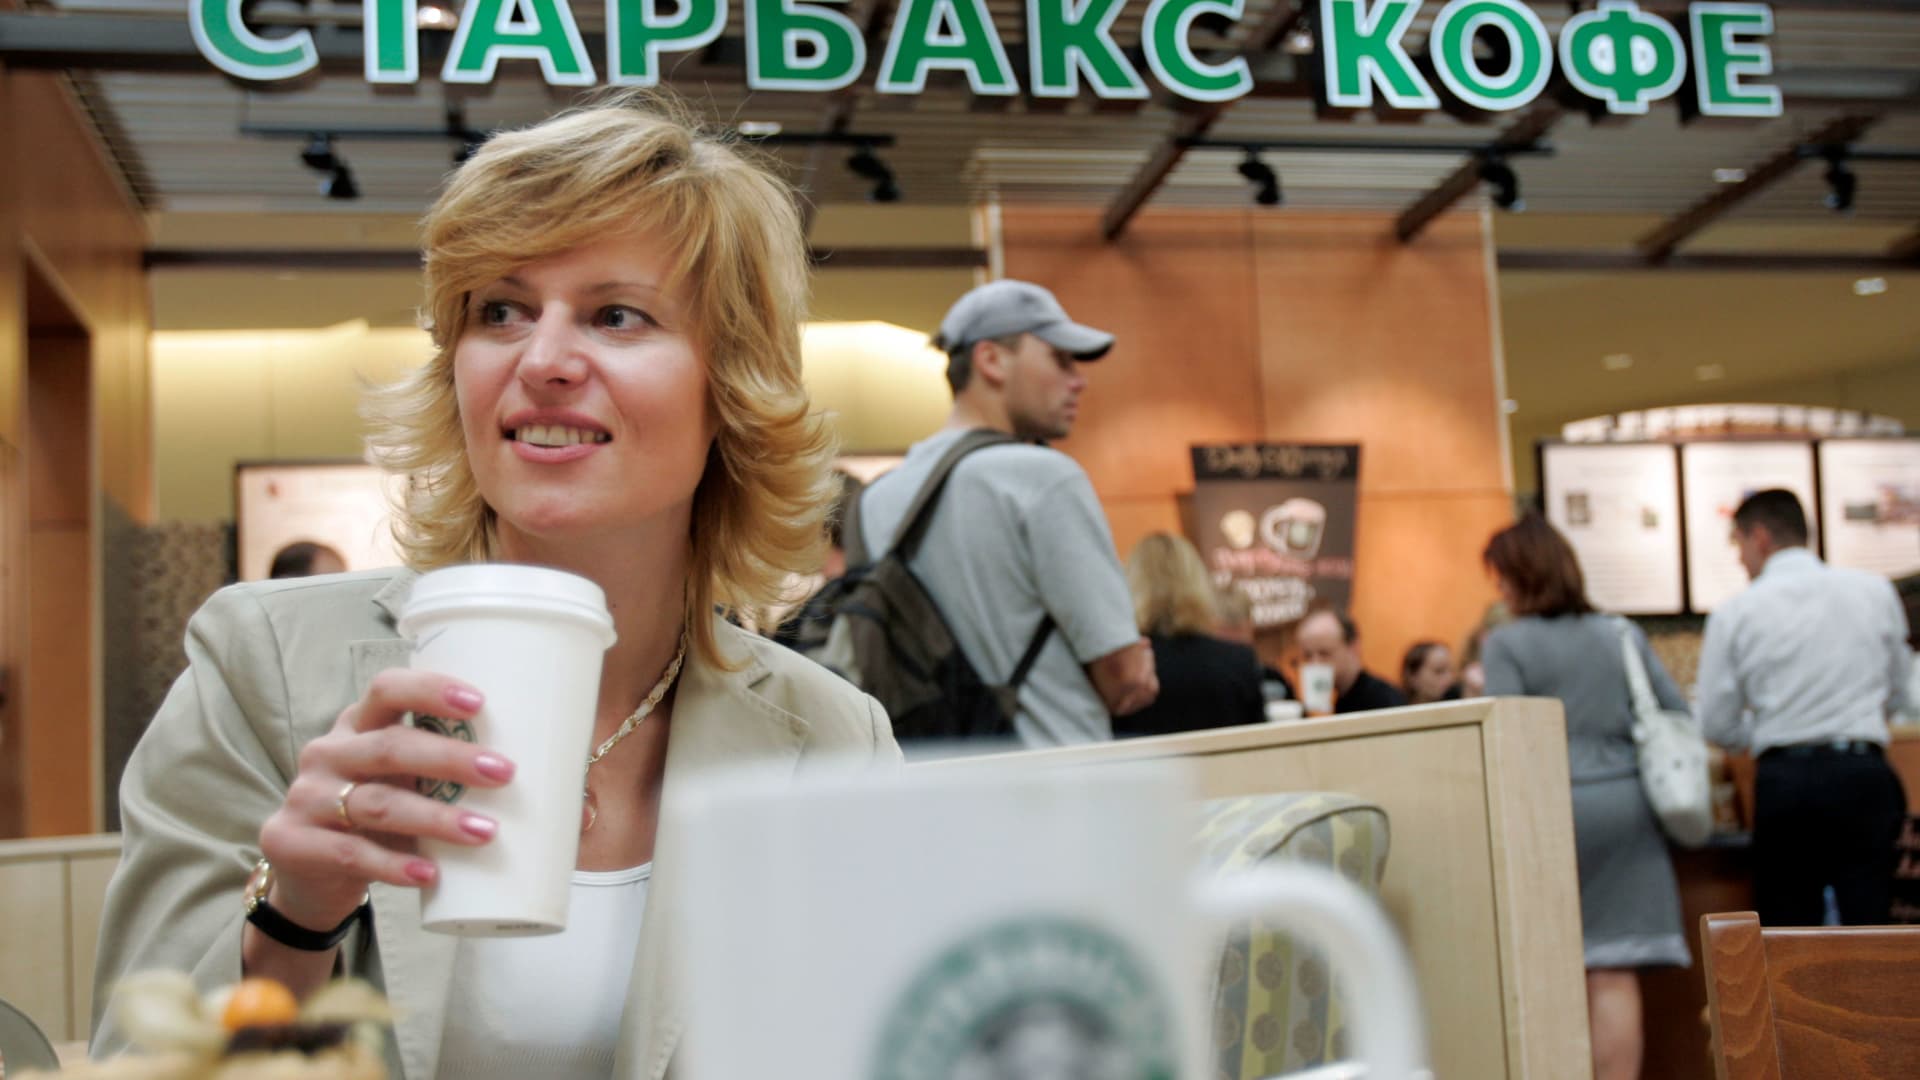 Starbucks will leave Russia after 15 years, closing 130 licensed cafes